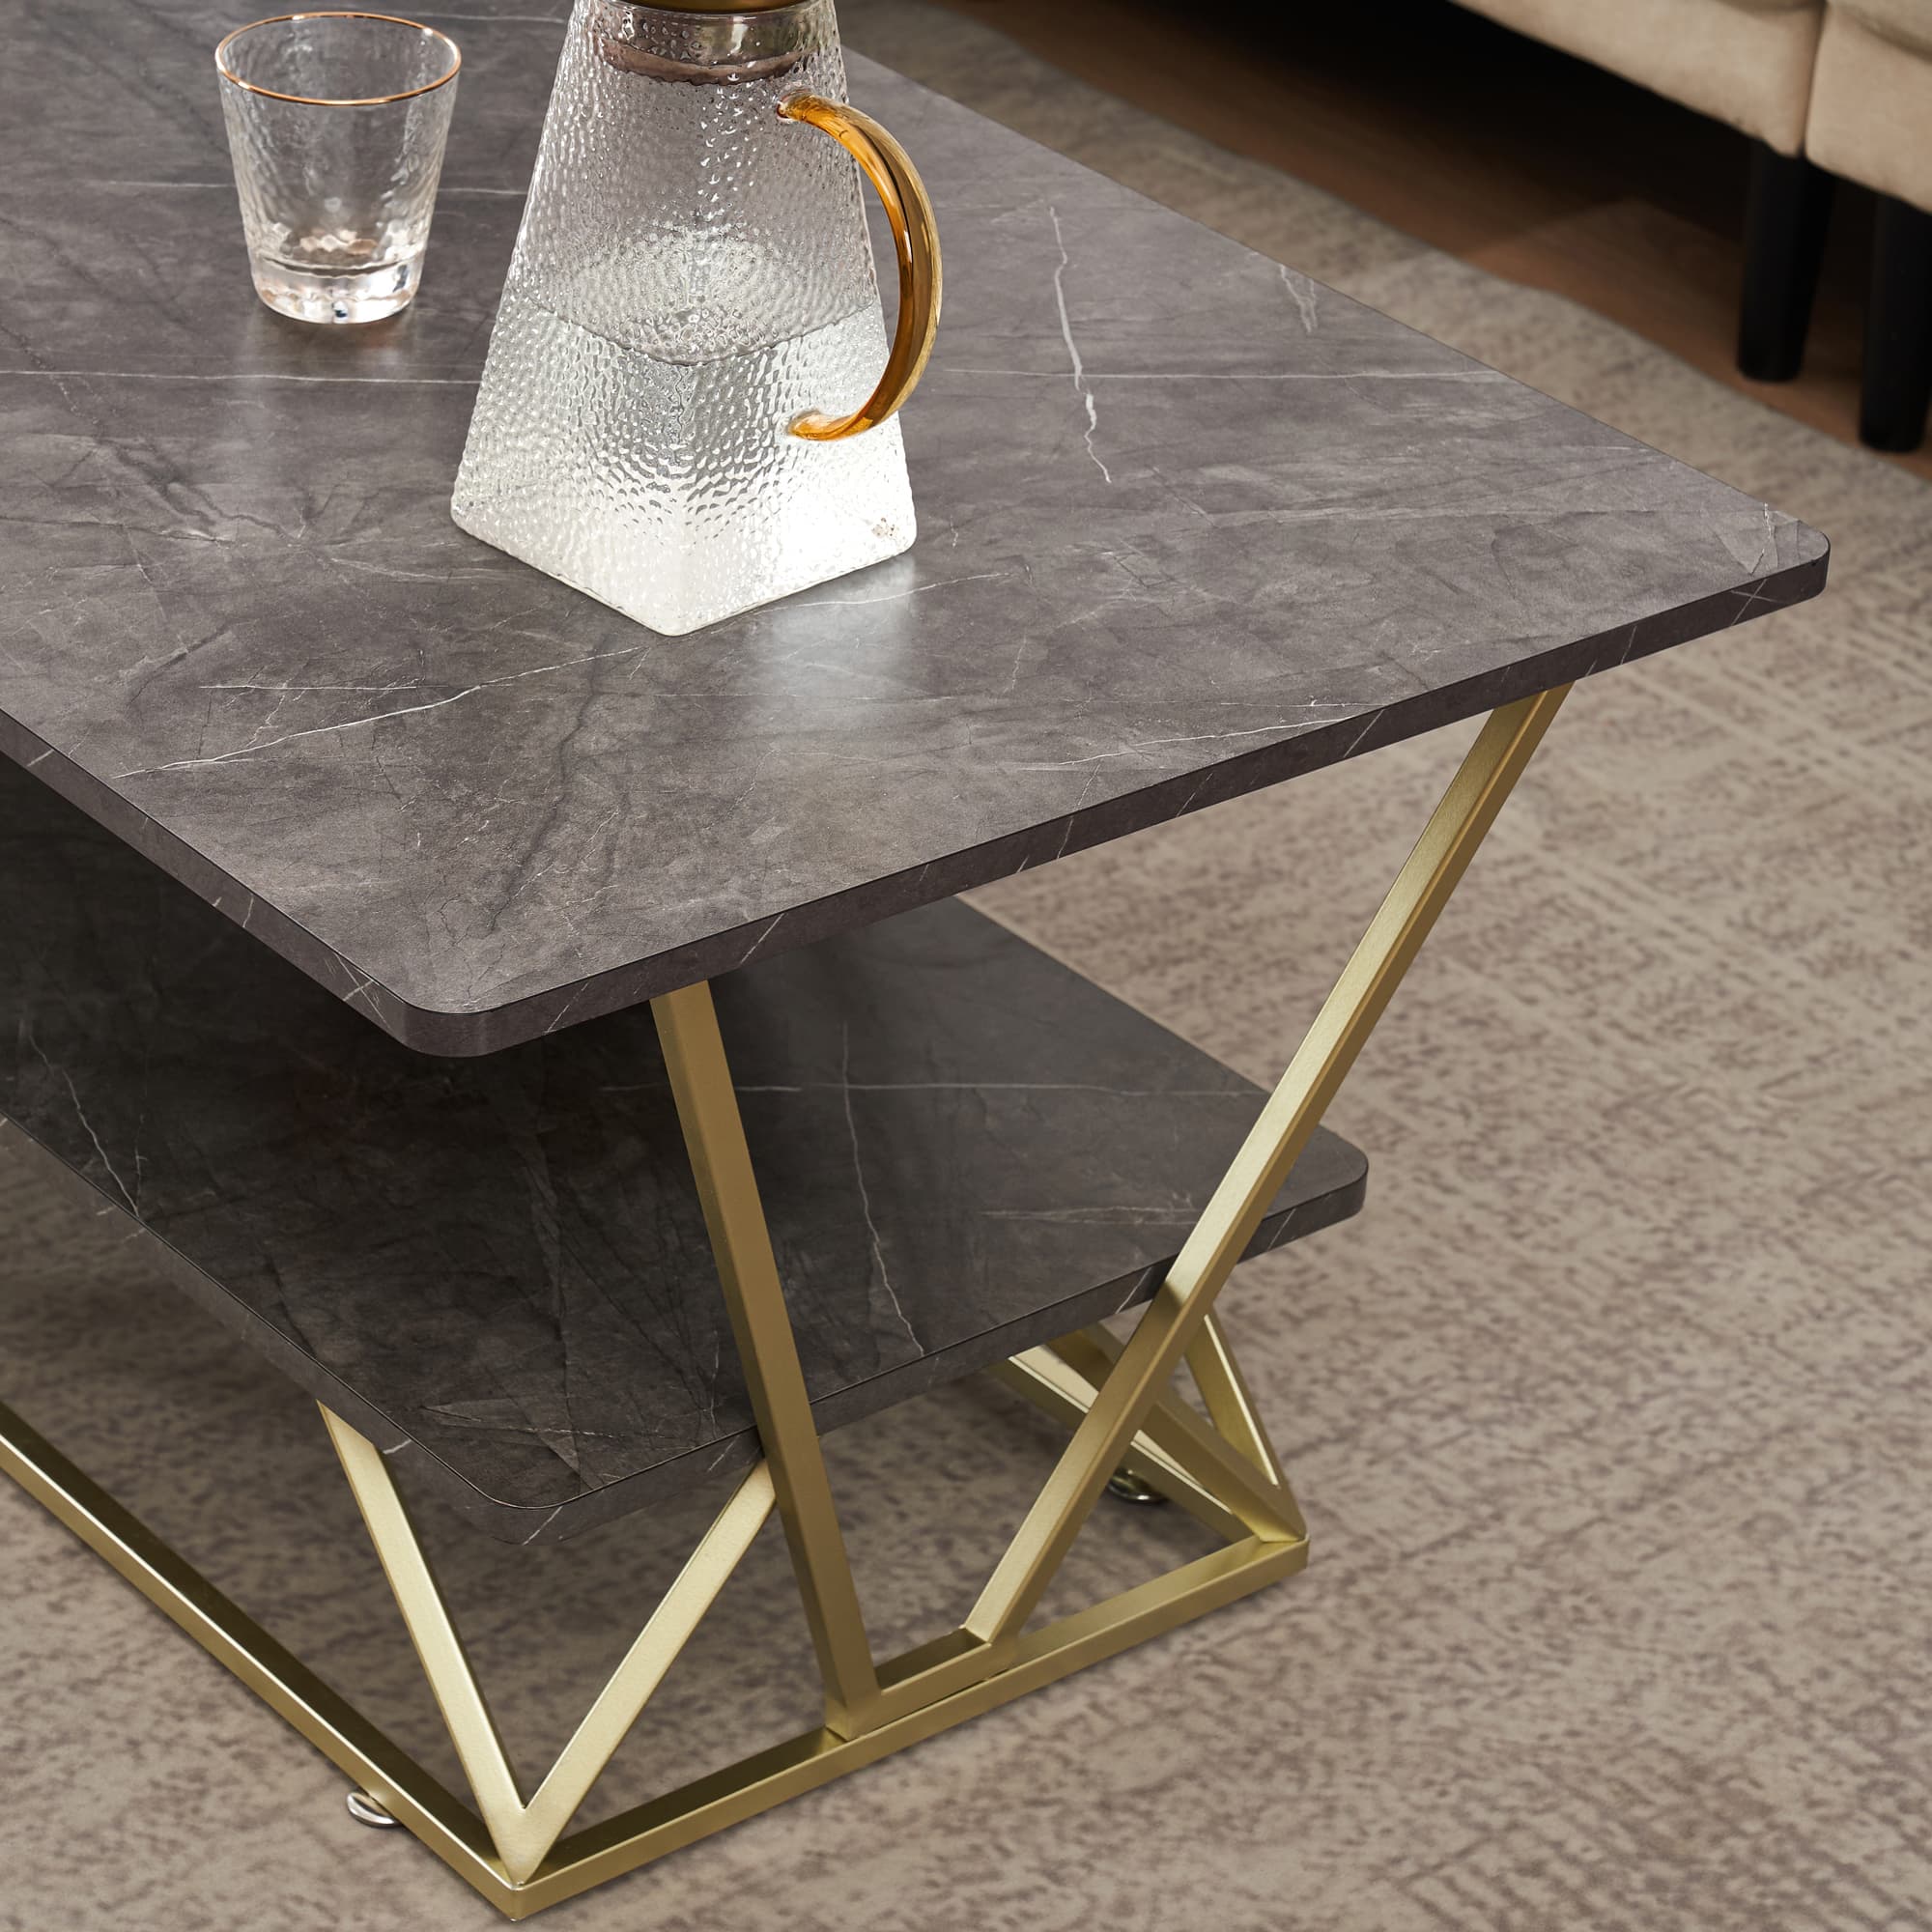 Ivinta Marble Gold Coffee Table, Farmhouse Modern Central TV Table, Cocktail Table